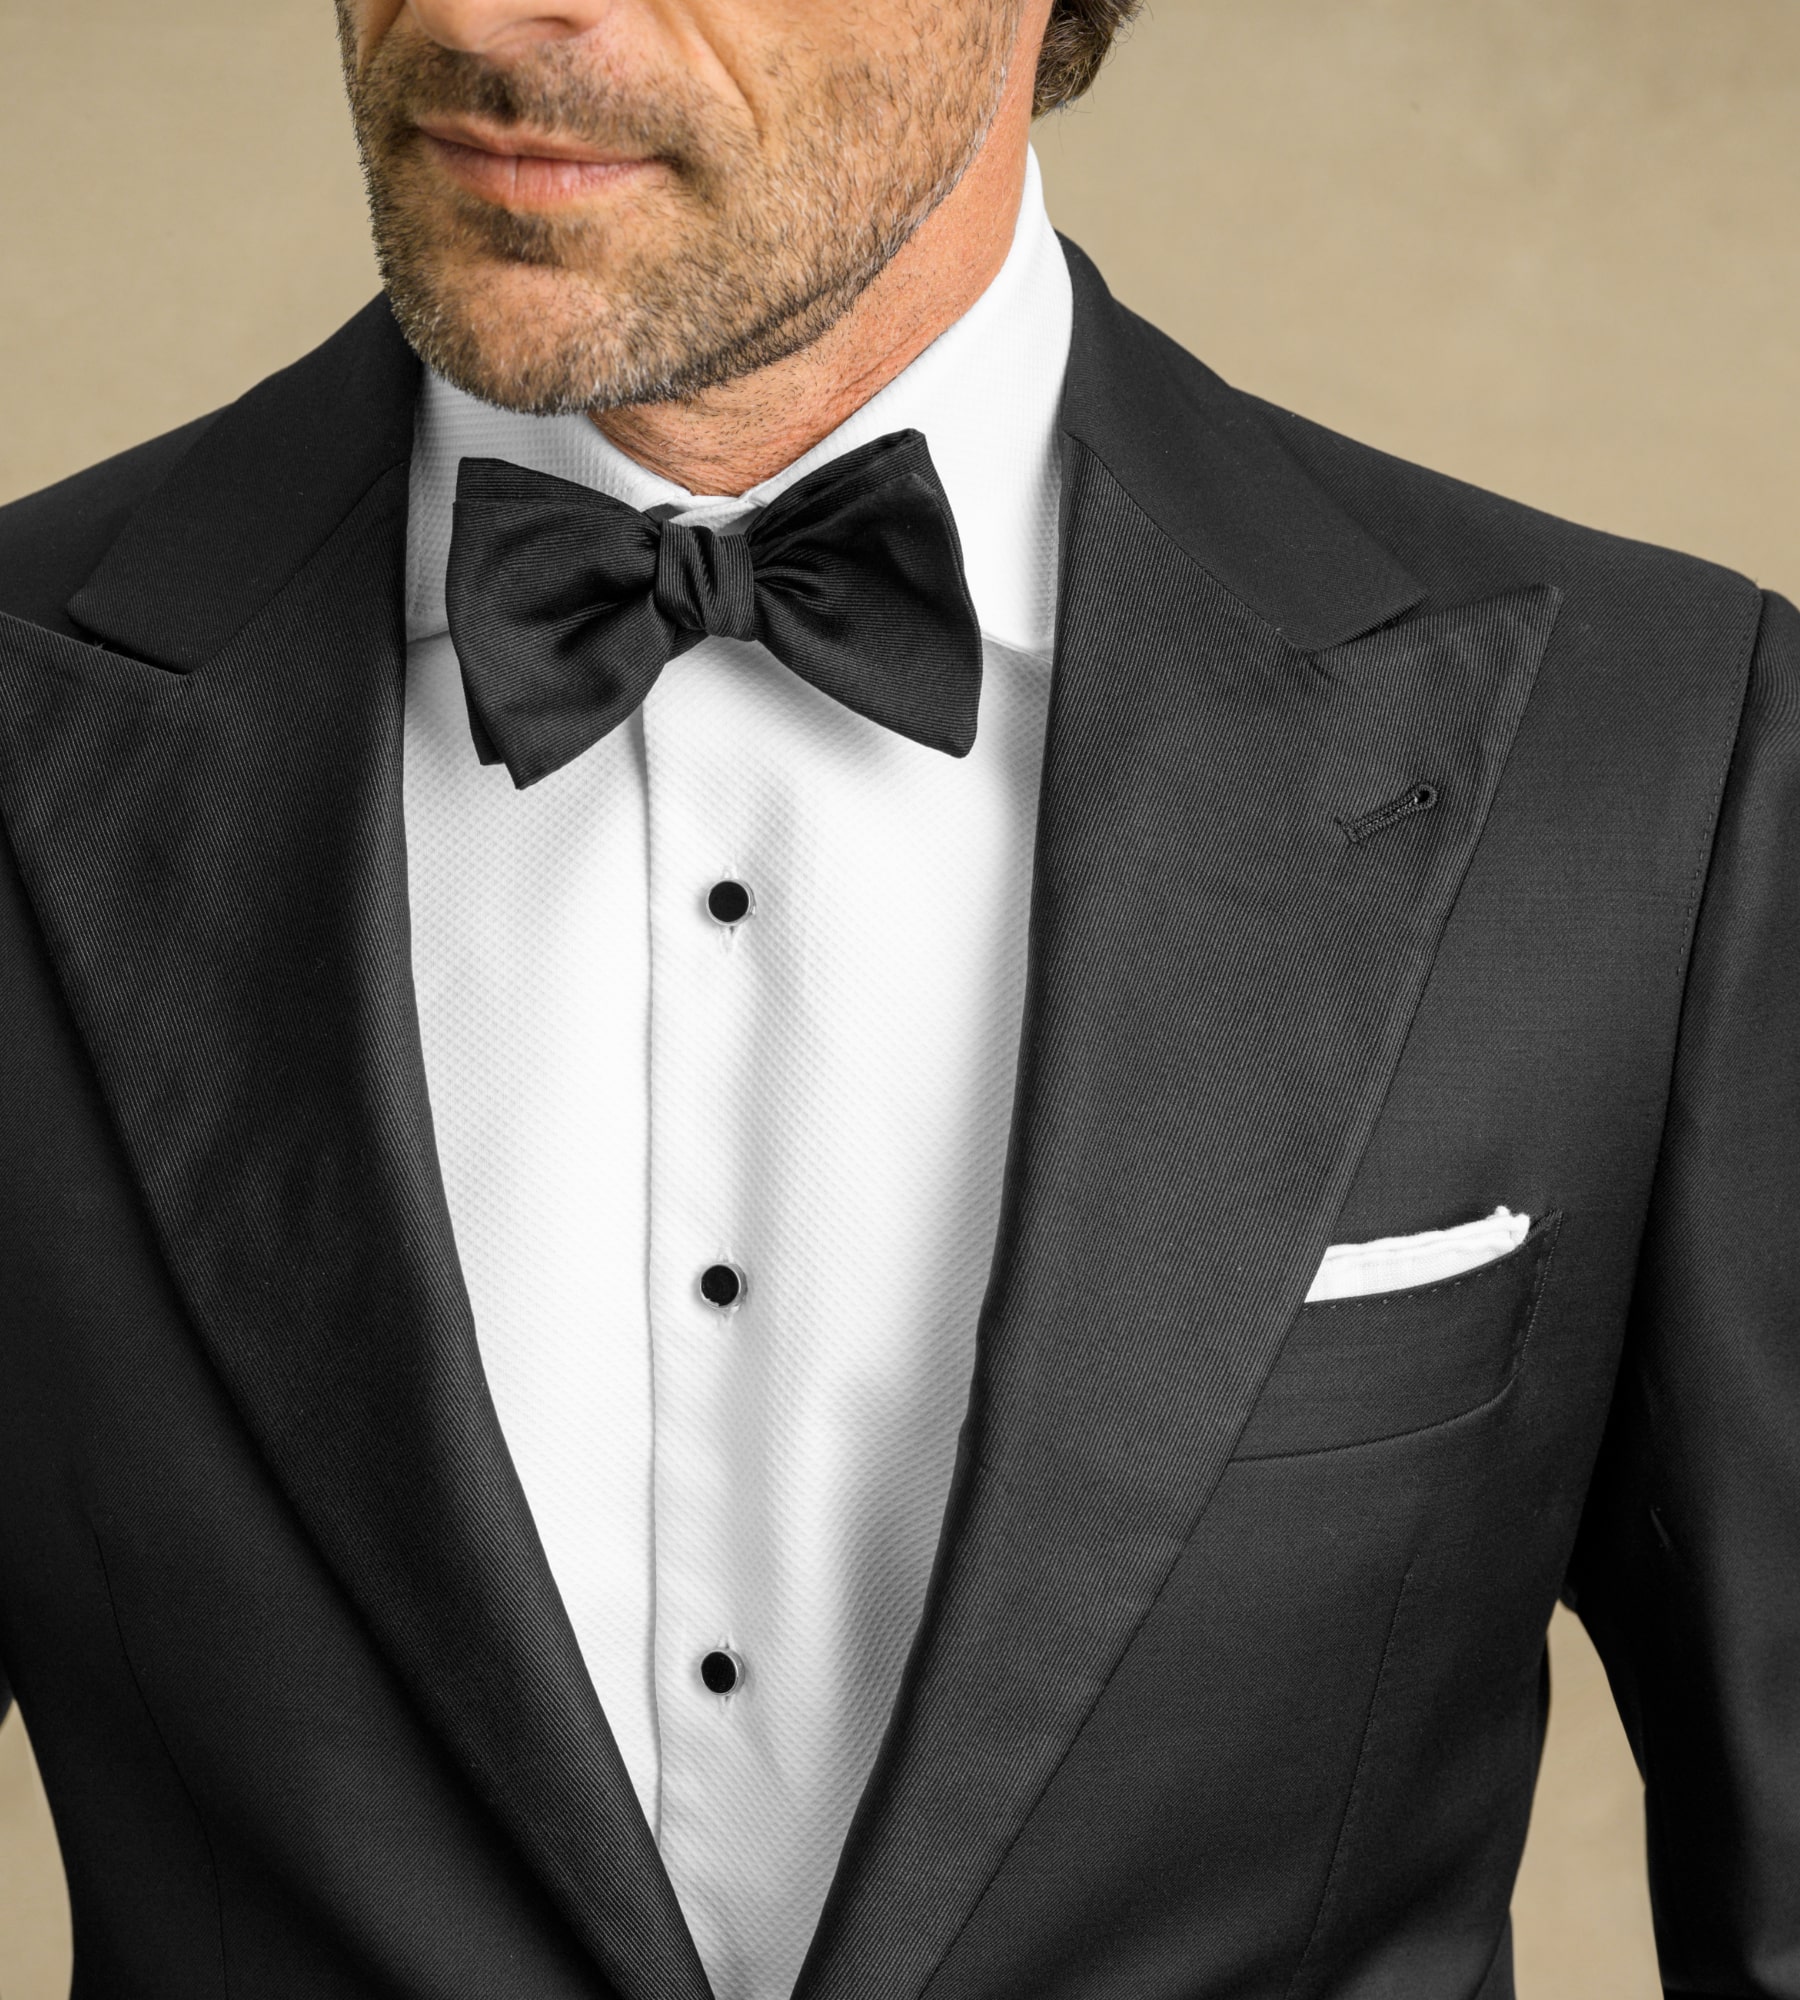 White Tie vs. Black Tie: Which Is More Formal?